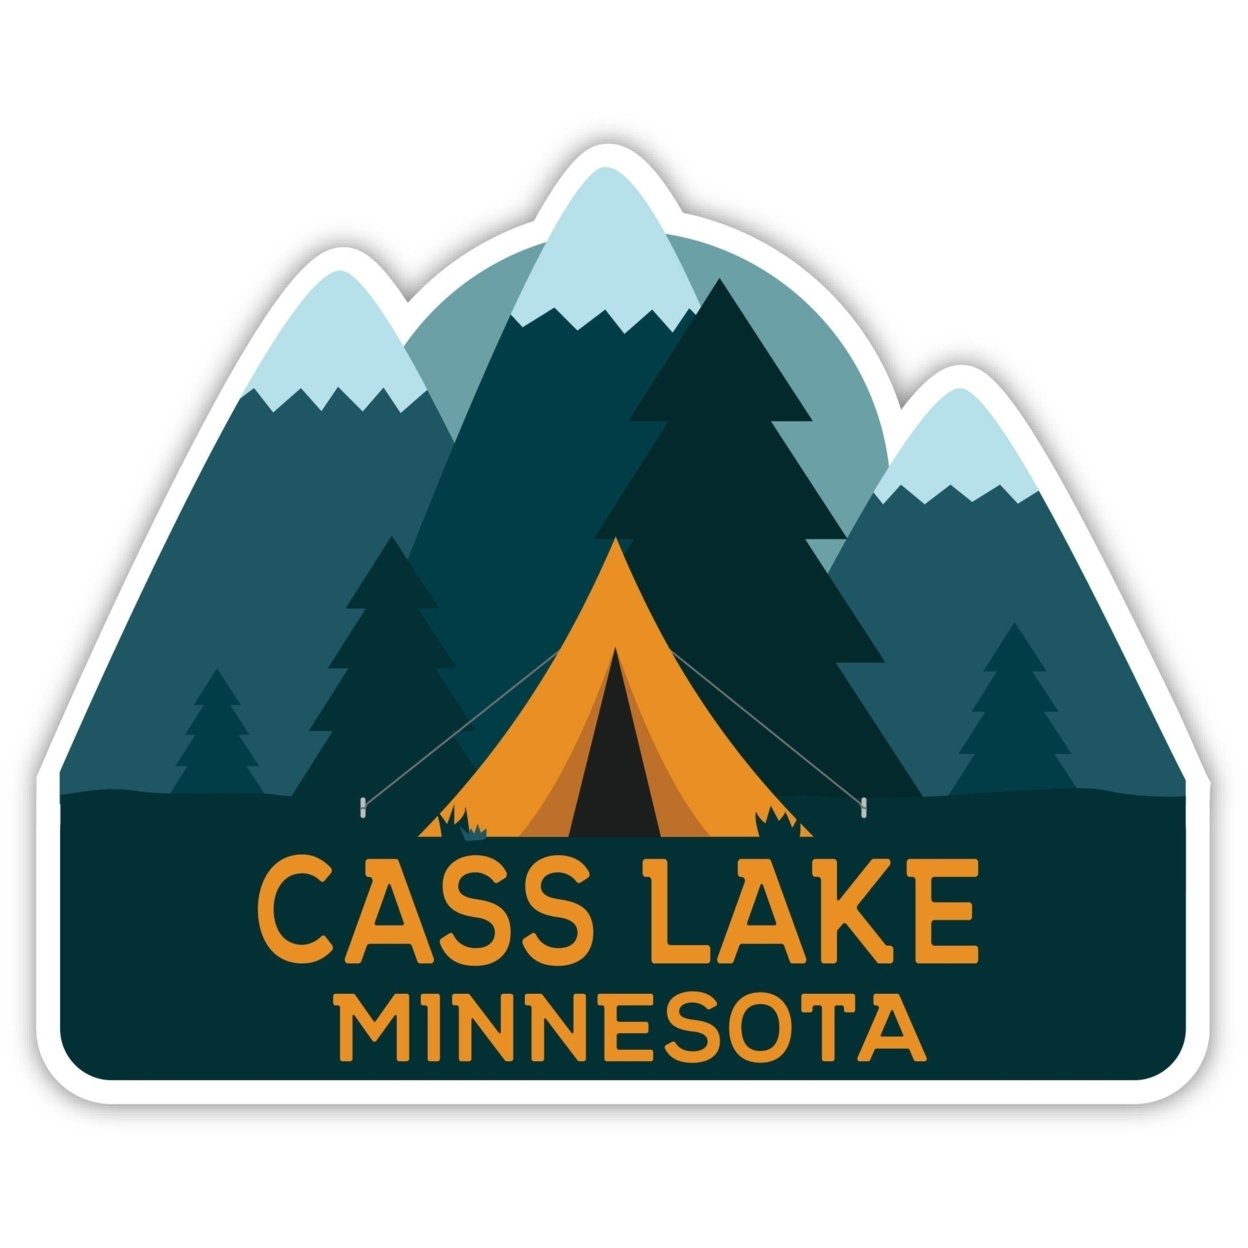 Cass Lake Minnesota Souvenir Decorative Stickers (Choose Theme And Size) - 4-Pack, 10-Inch, Great Outdoors